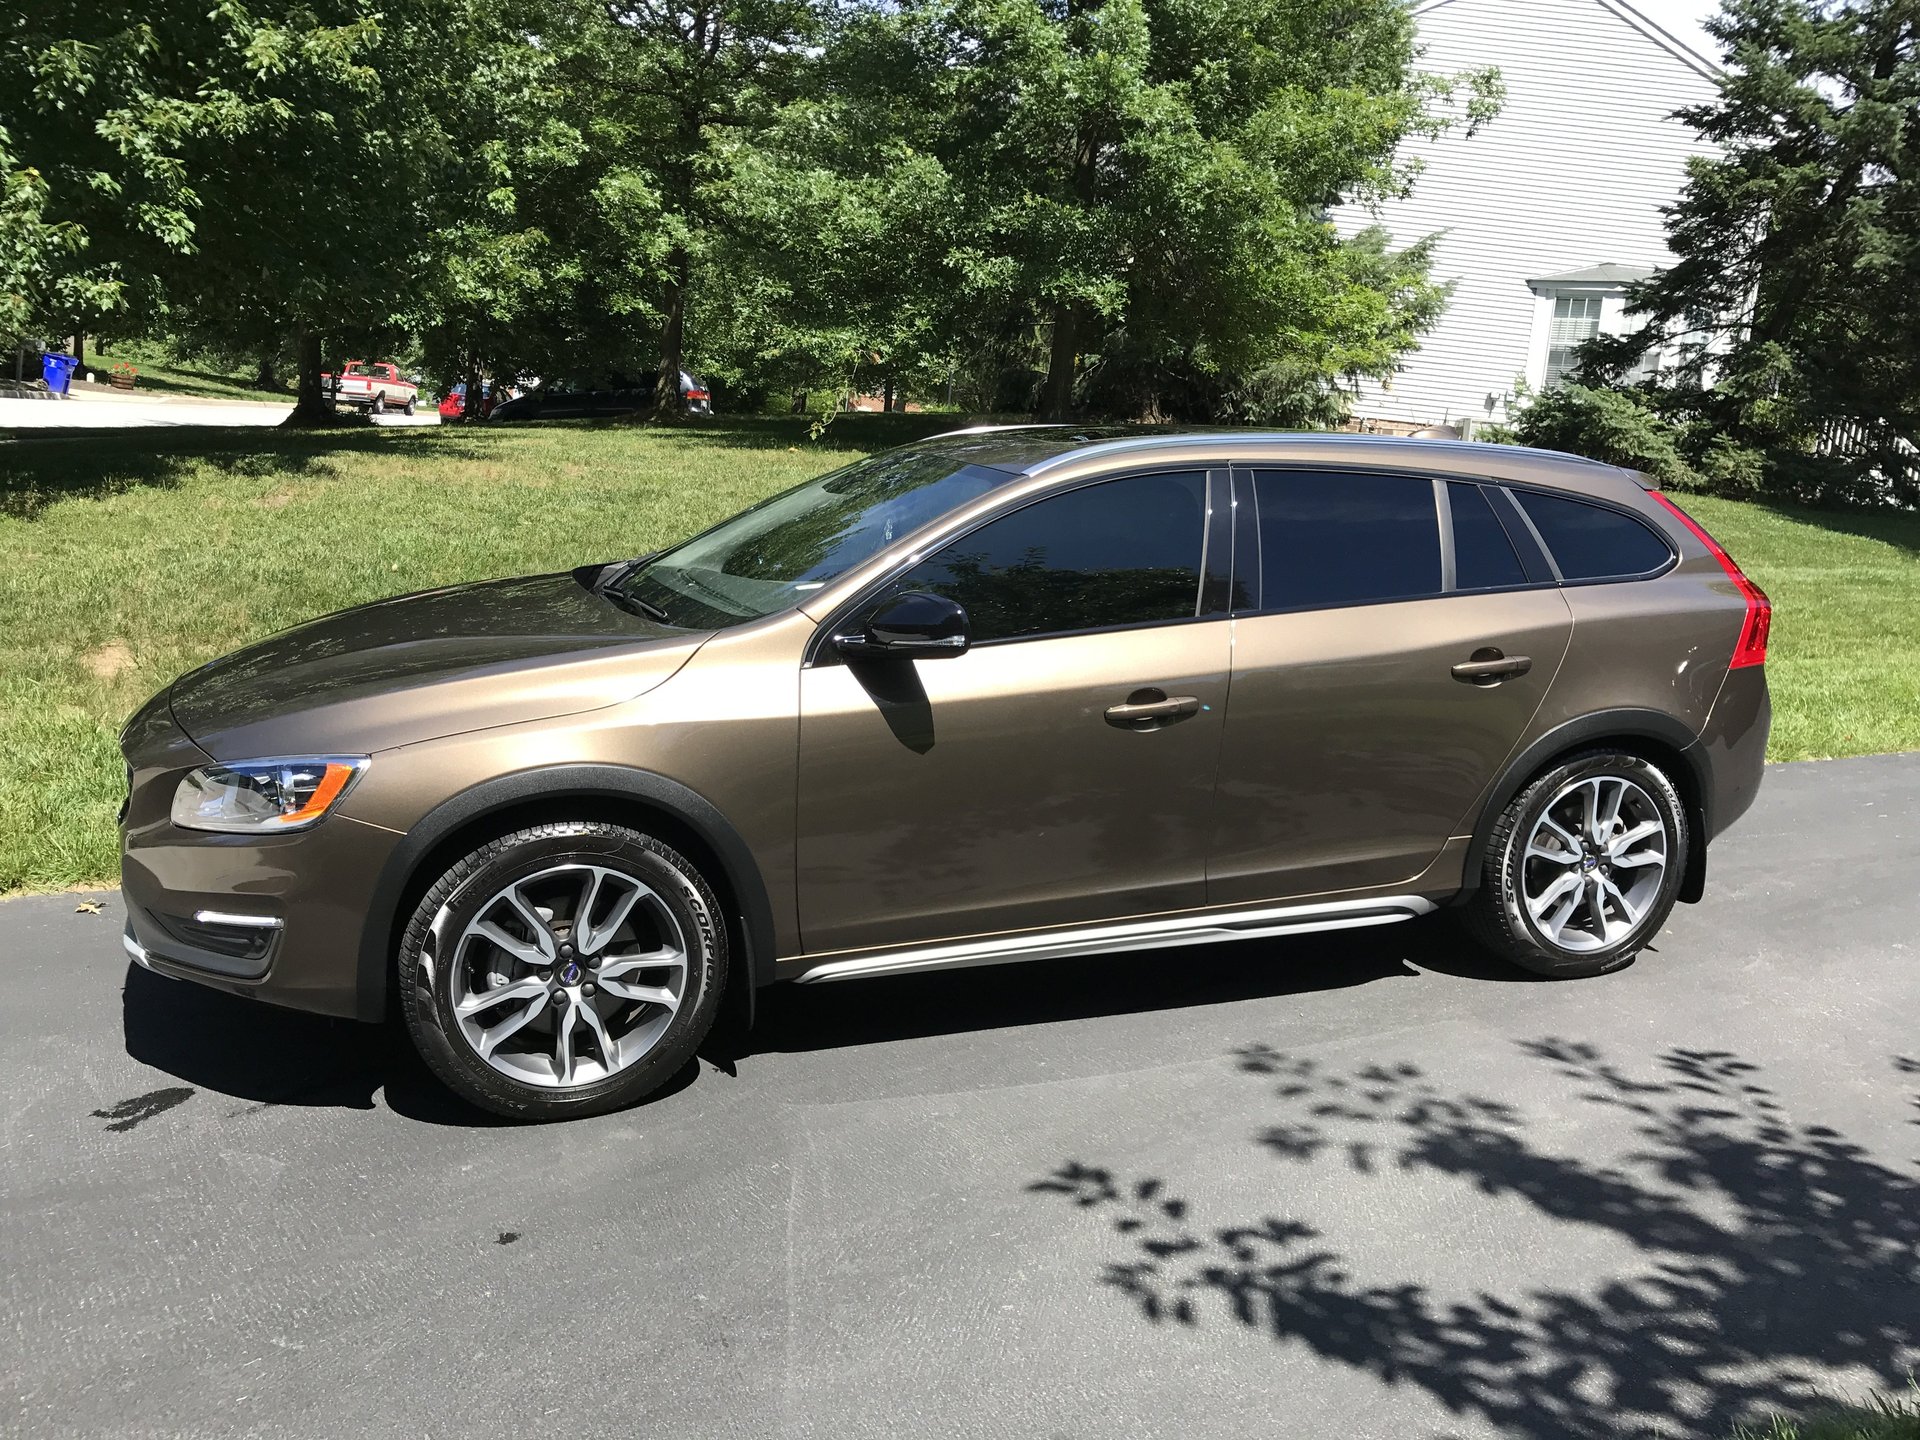 SOLD: '16 V60 Cross Country T5 AWD / Twilight Bronze Mettalic | SwedeSpeed  - Volvo Performance Forum